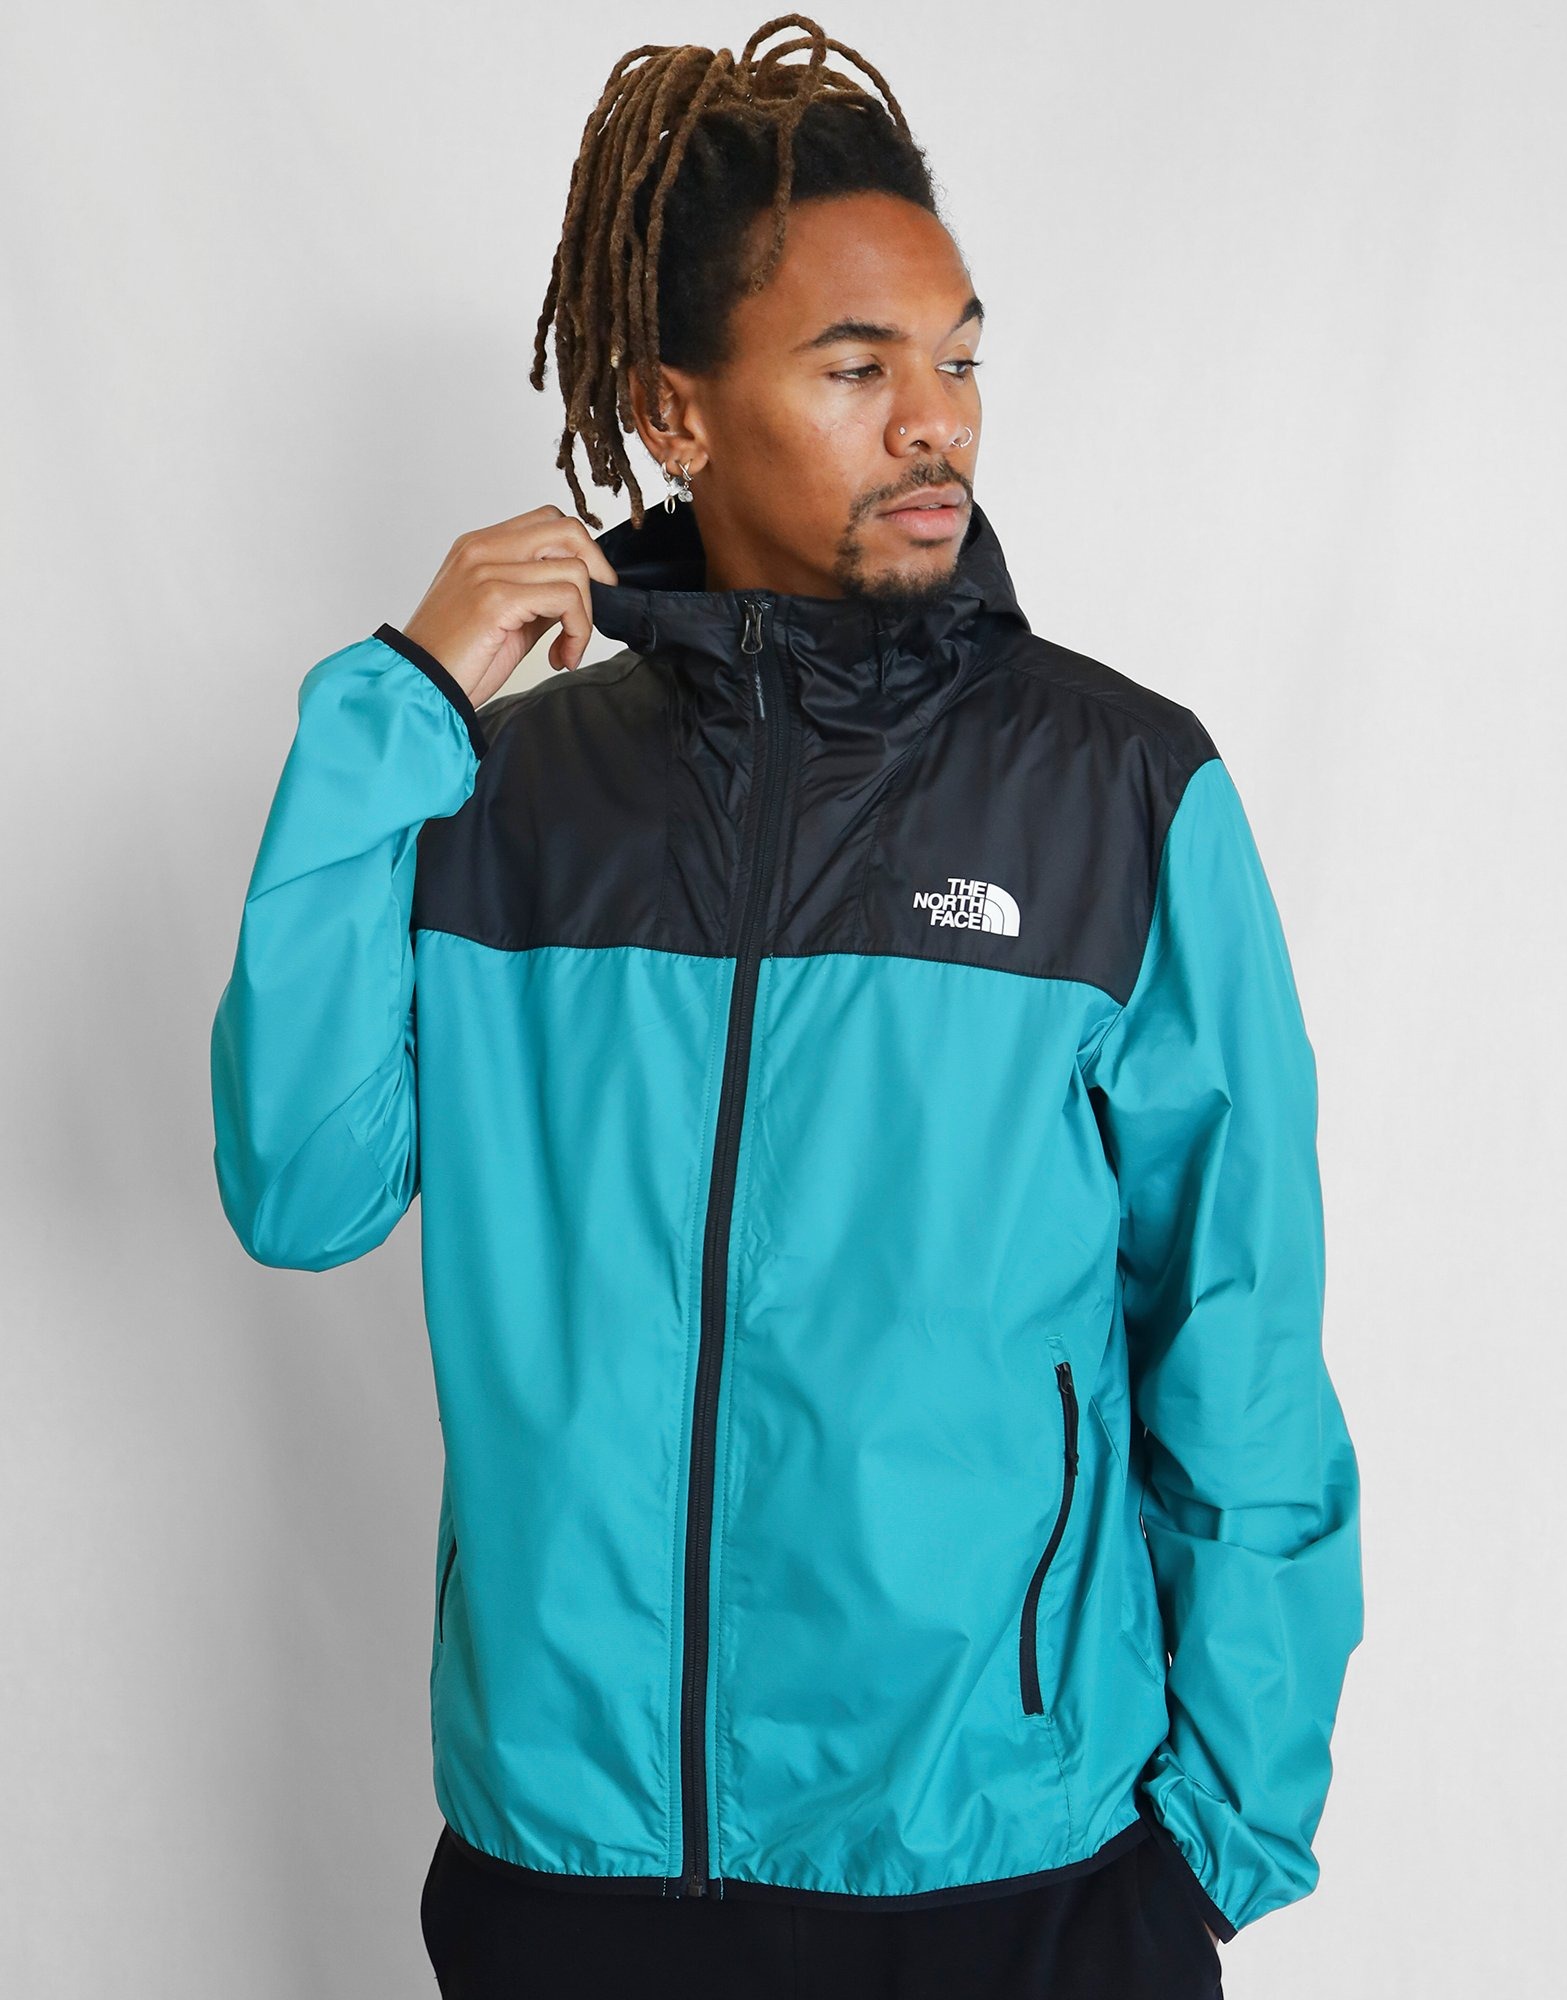 Buy Black The North Face Cyclone Jacket Men's | JD Sports | JD Sports ...